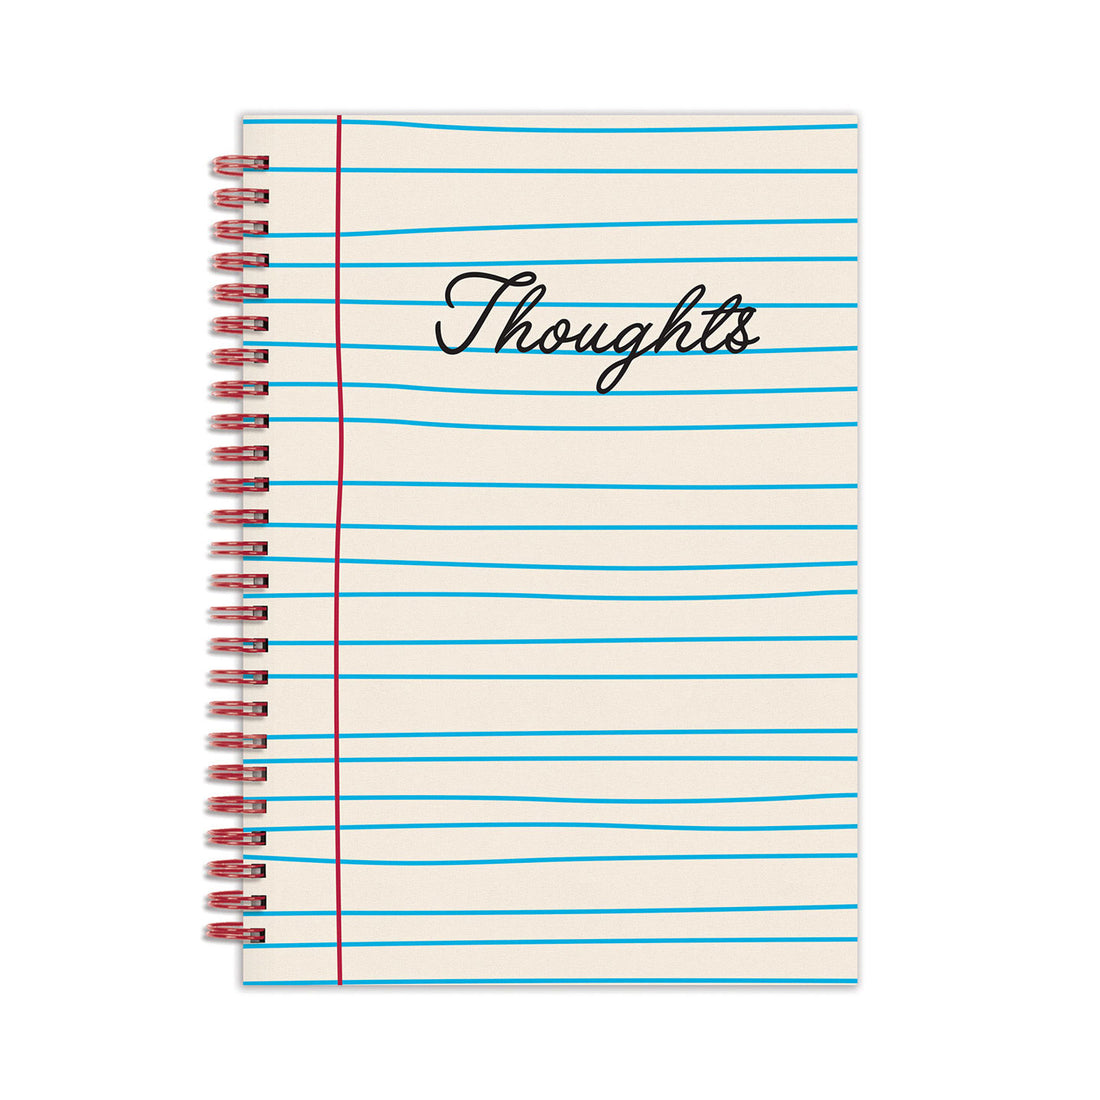 Chronicle Books Thoughts 6 x 8" Wire-O Journal